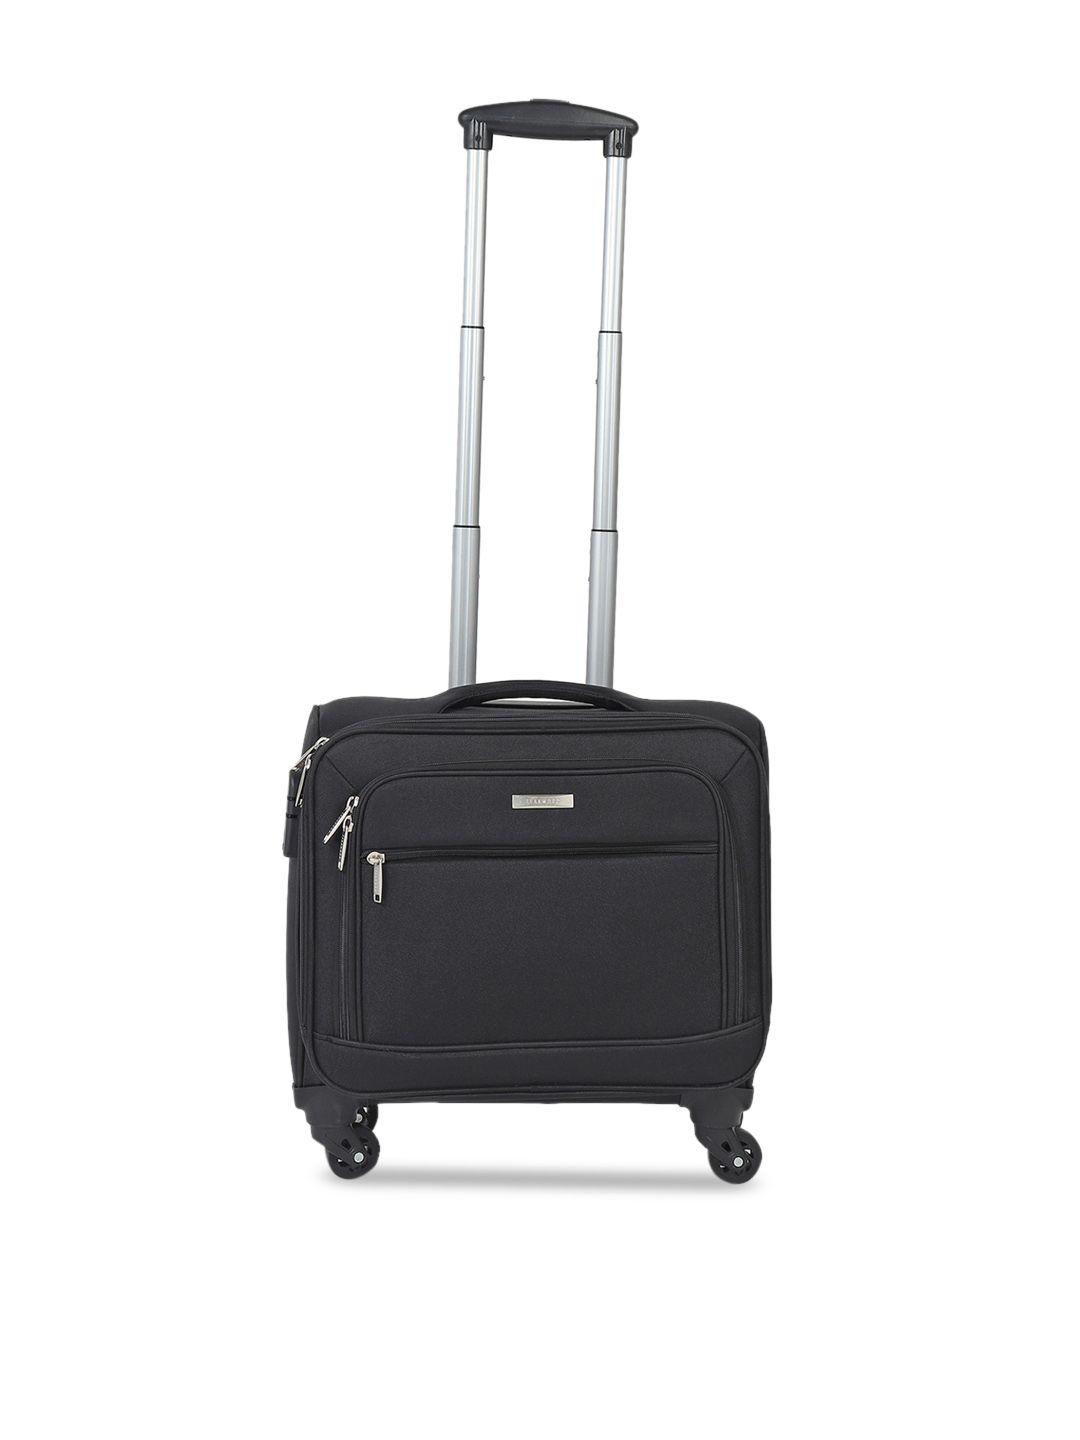 teakwood leathers black textured soft-sided cabin trolley suitcase